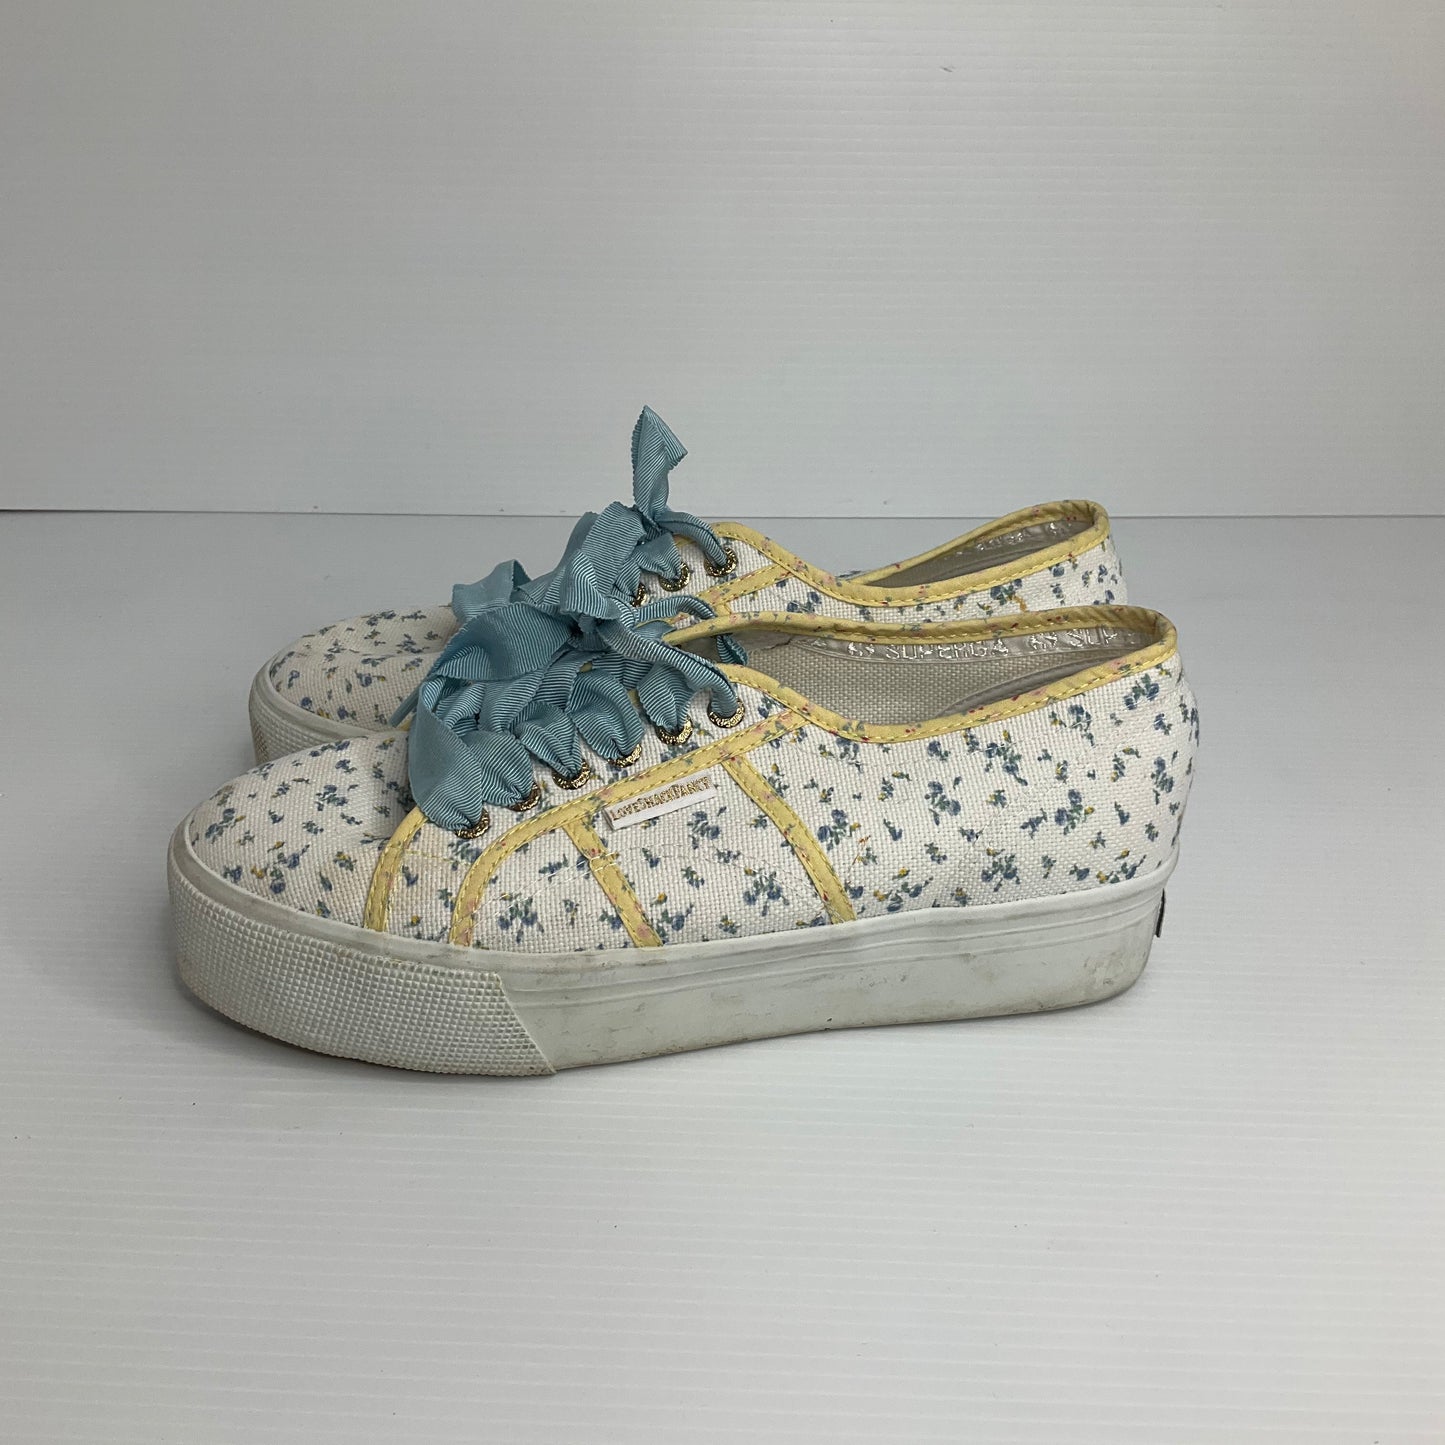 Floral Print Shoes Sneakers Superga, Size 10